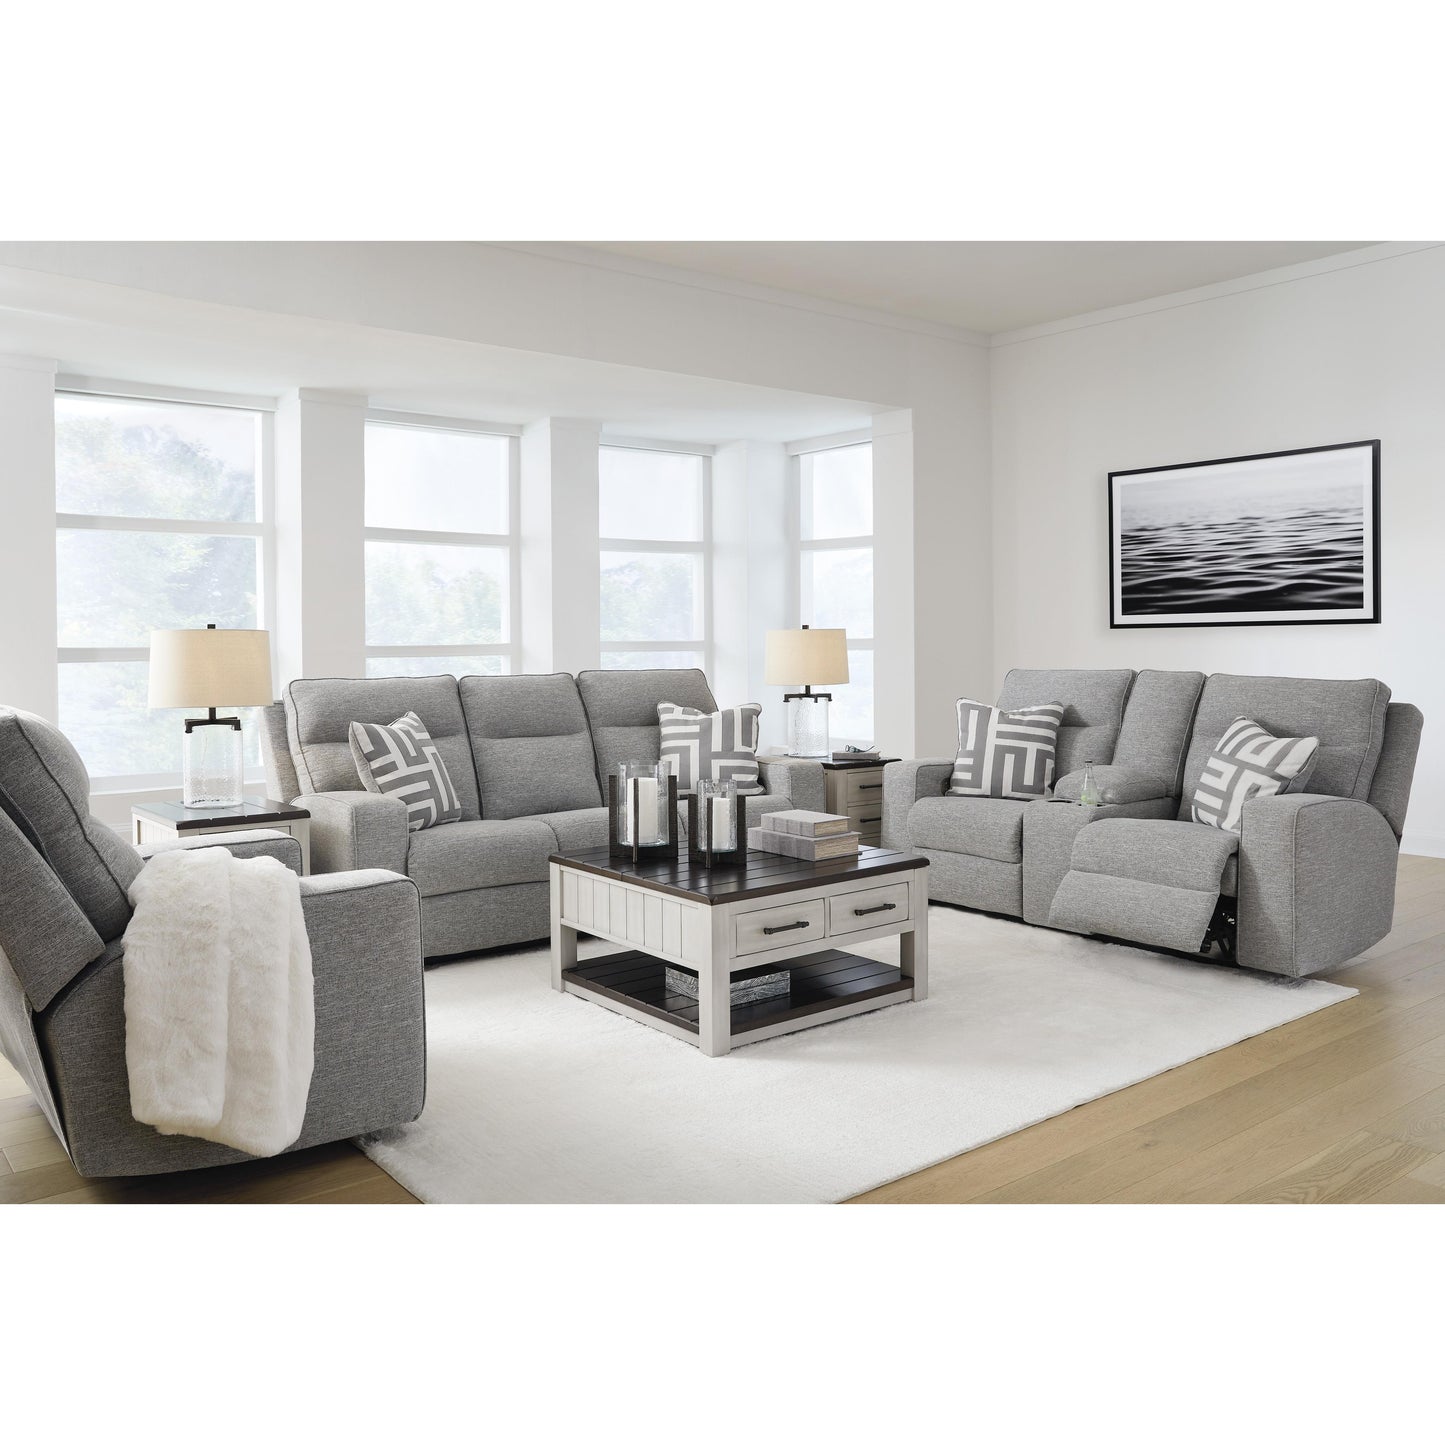 Signature Design by Ashley Biscoe Power Reclining Fabric Sofa 9050315 IMAGE 12